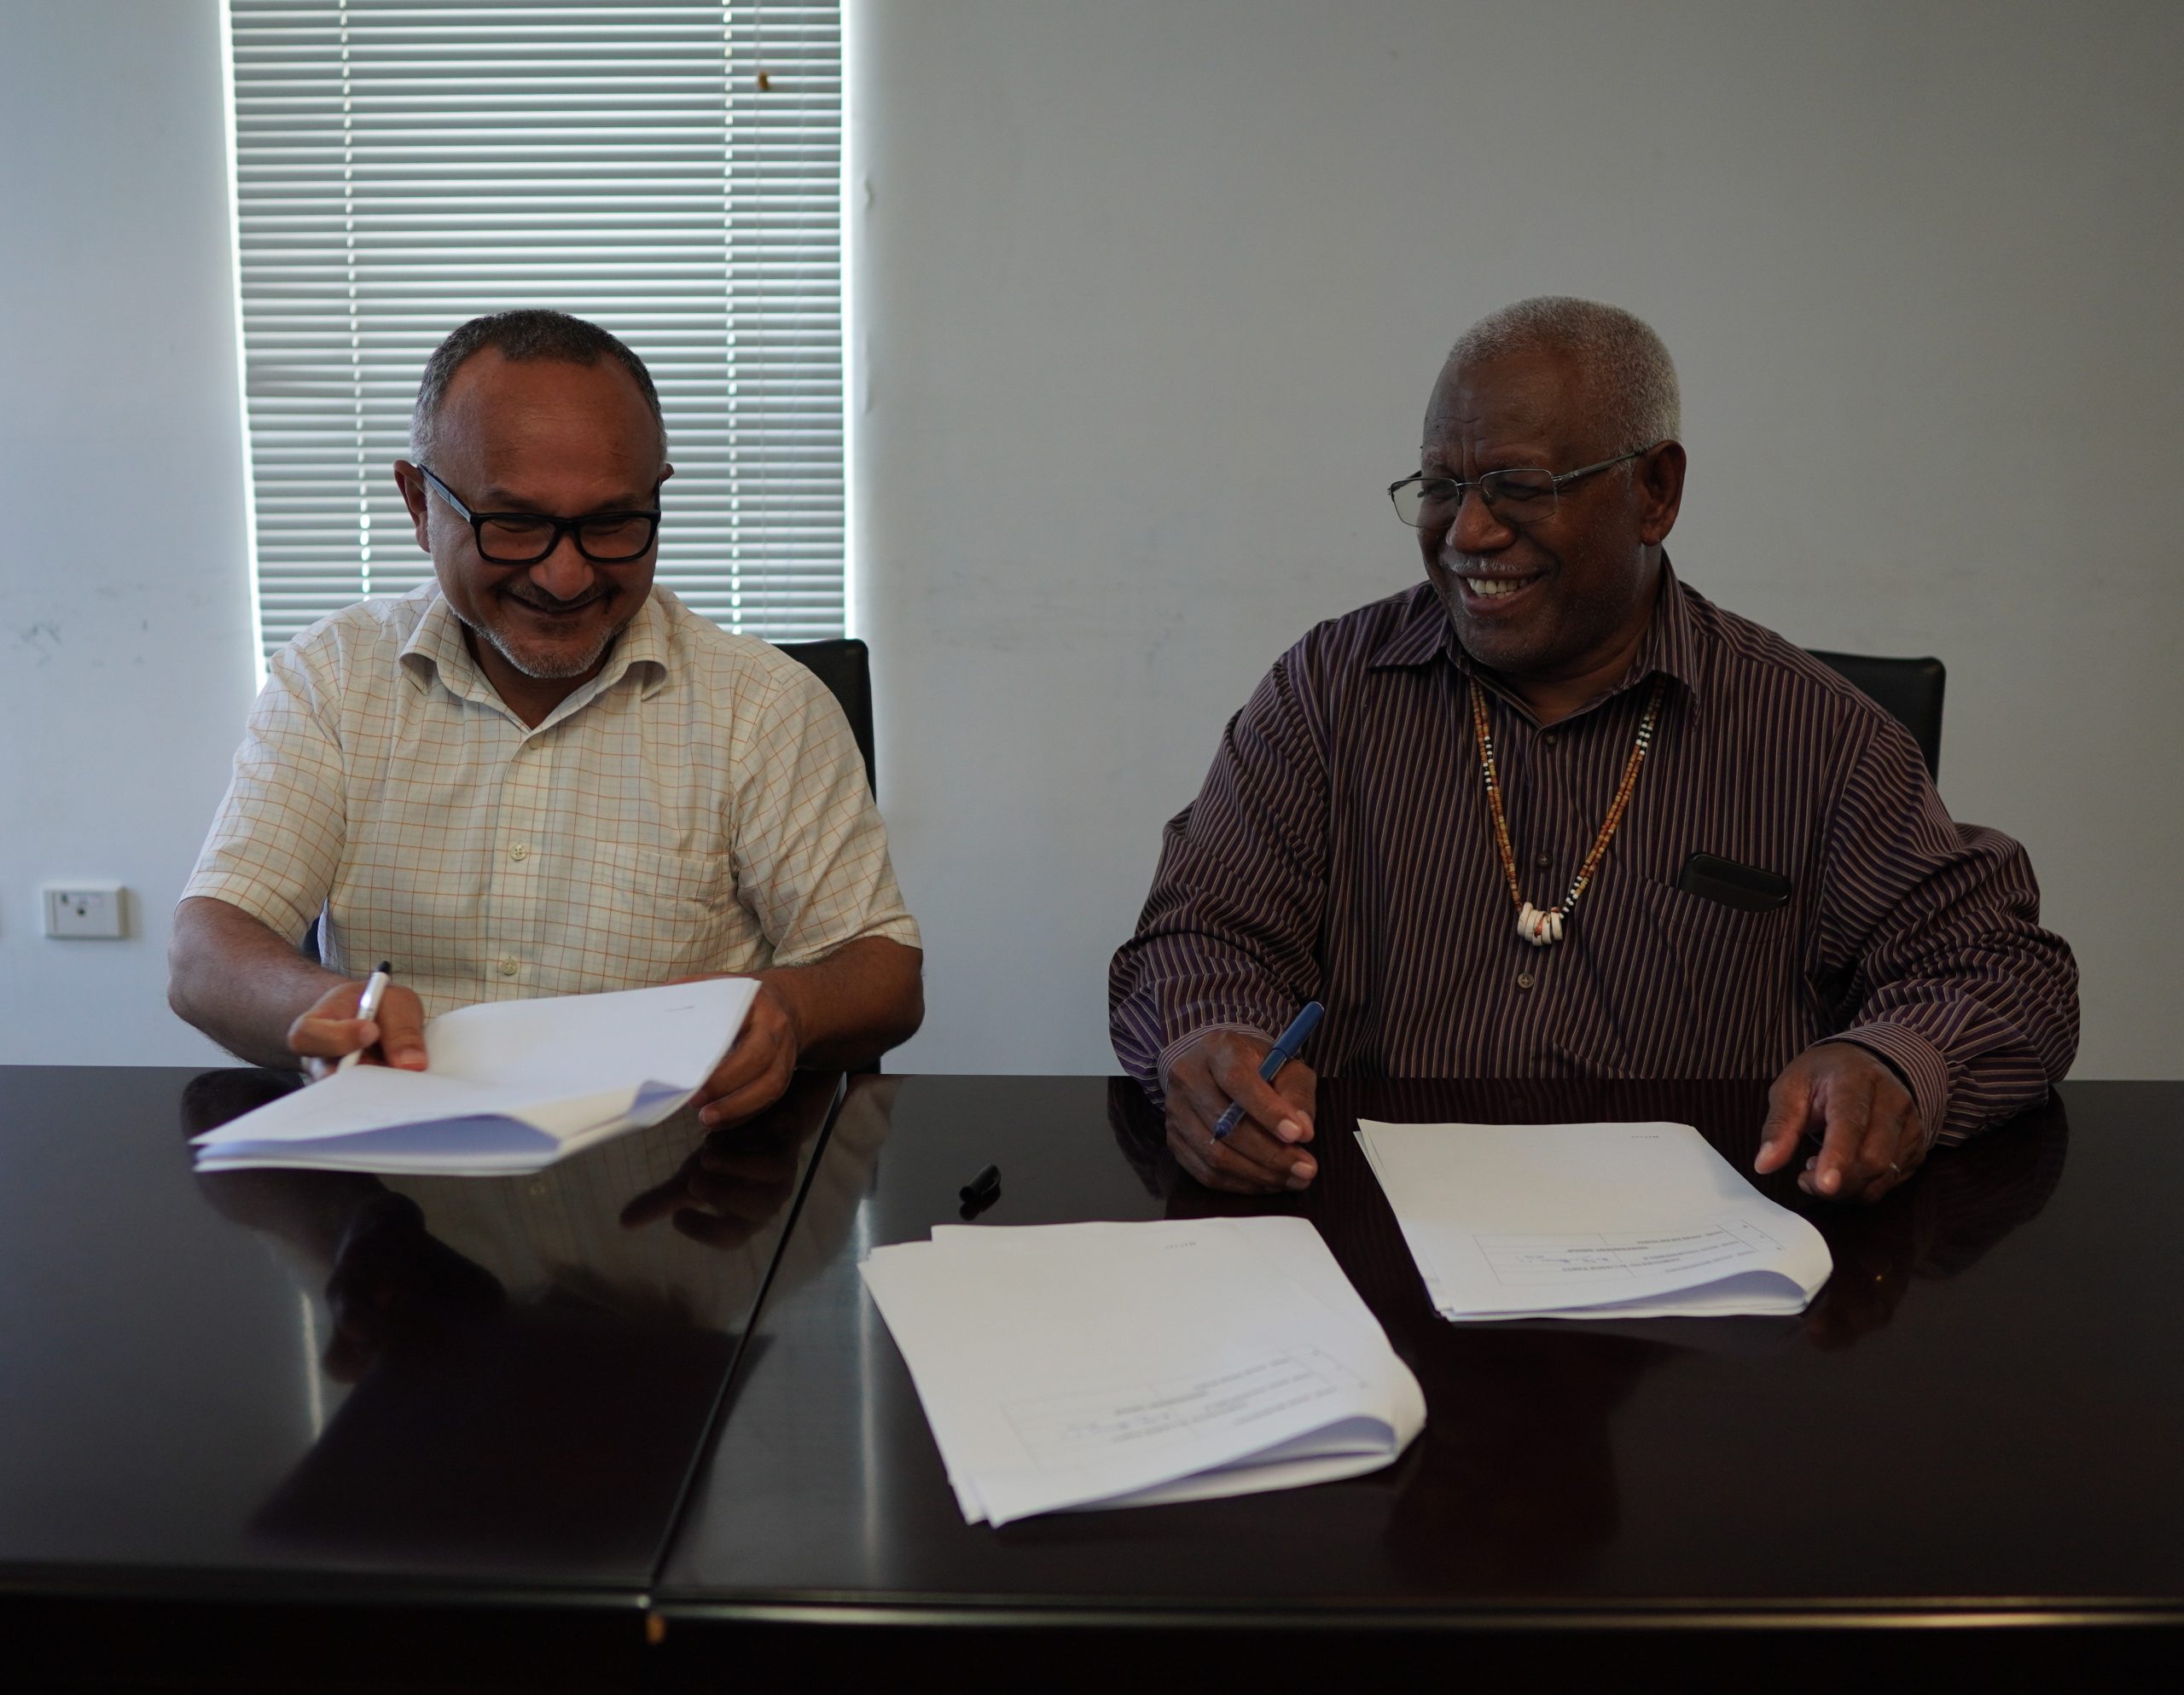 ‘WE CARE’: SIDP and DAP signs coalition agreement ahead of elections